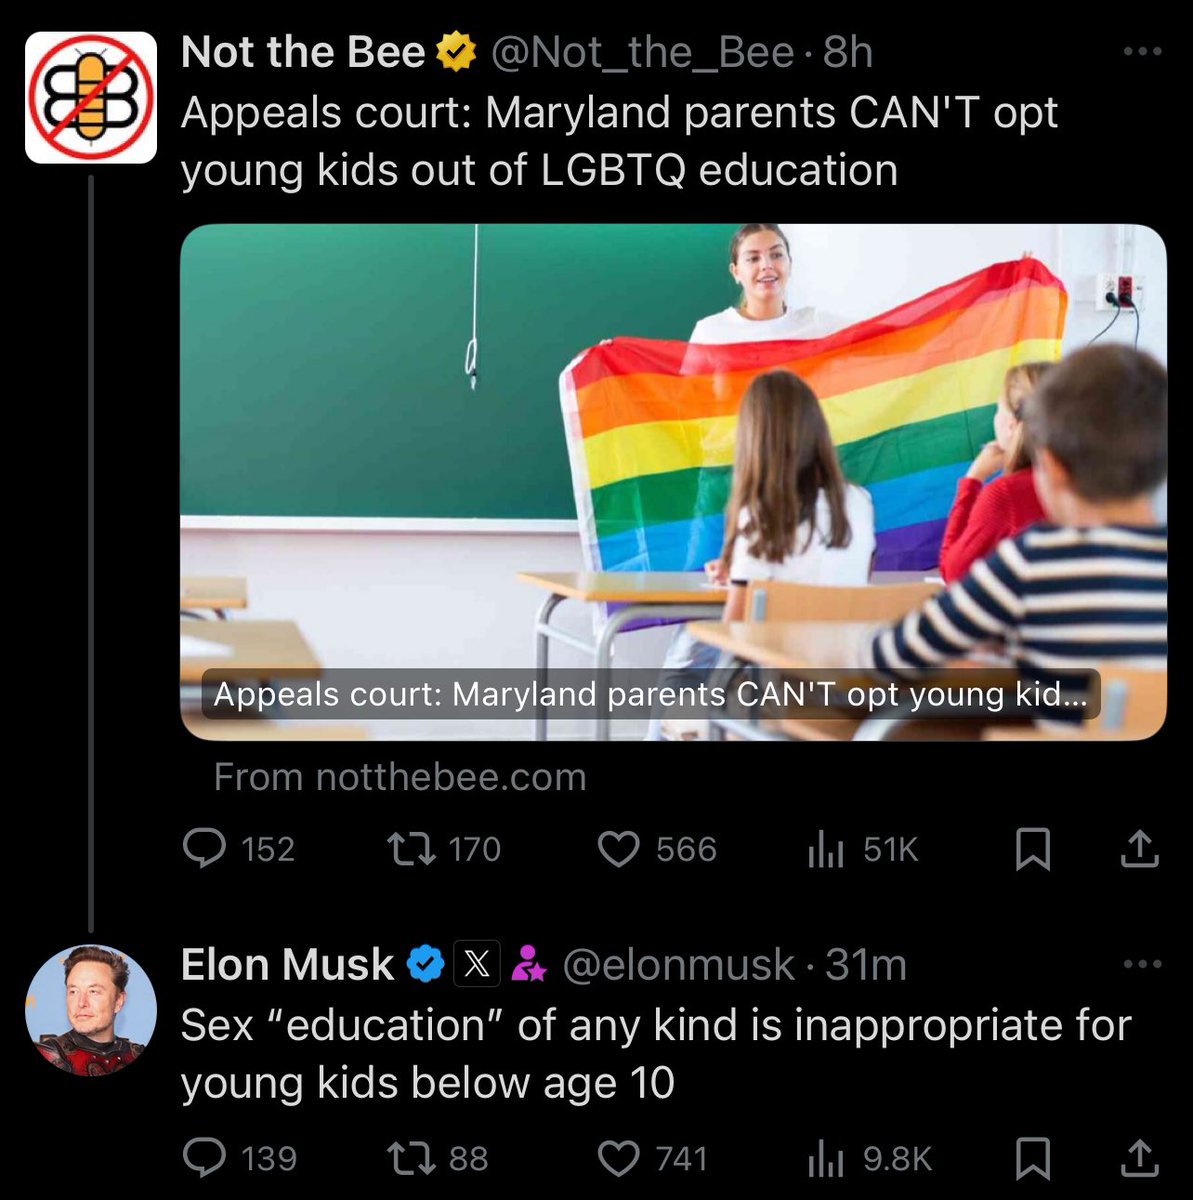 He thinks kids learning about LGBTQ people is the same as sex ed because he views all LGBTQ people as inherently sexual because he’s a transphobic and homophobic Nazi